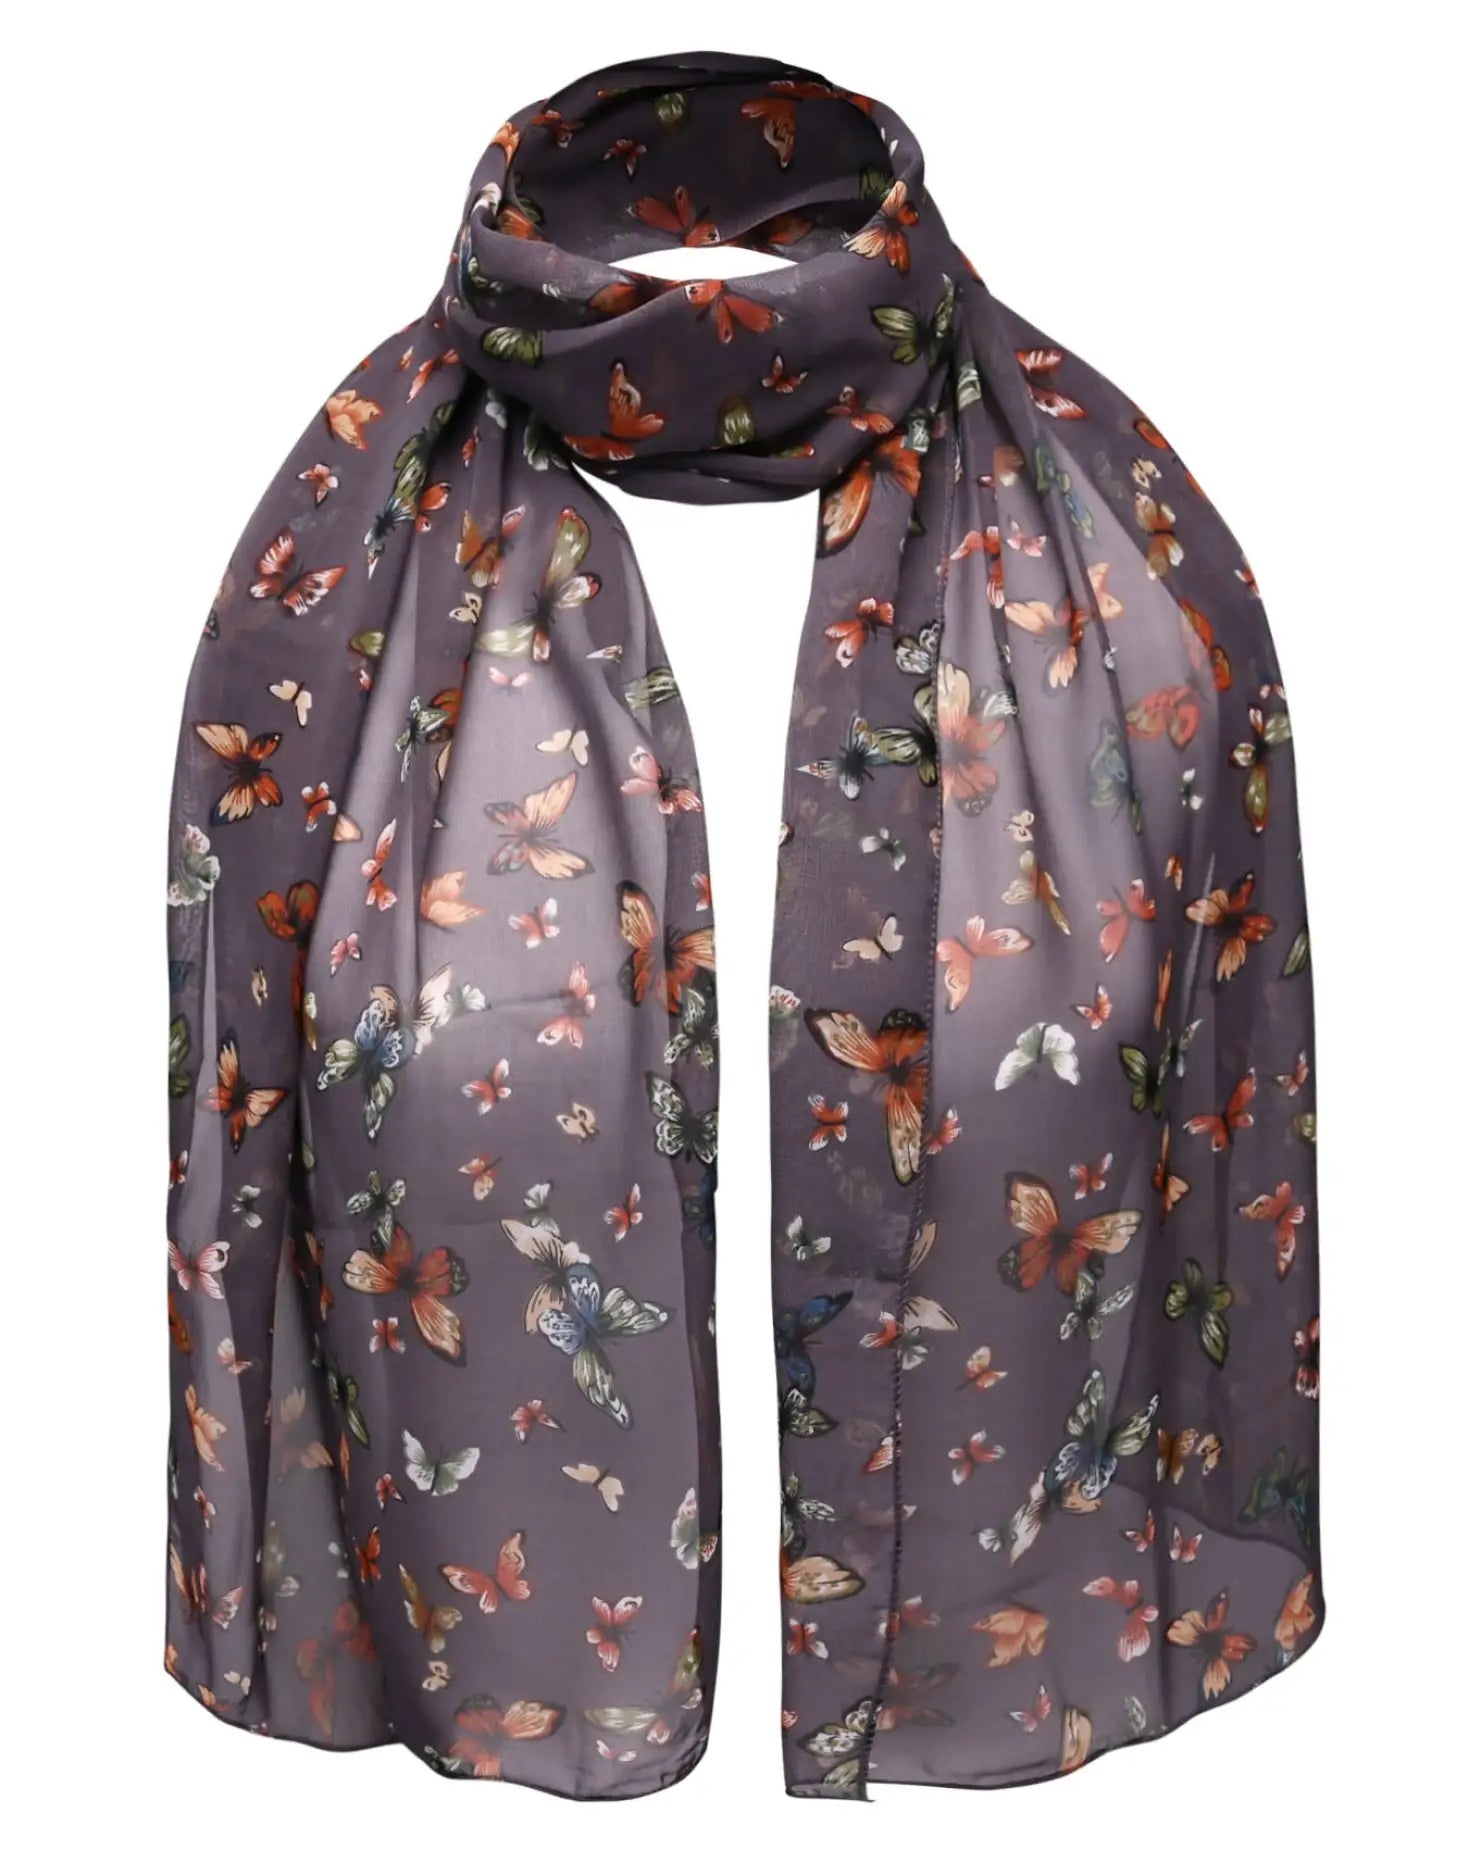 Butterfly print scarf with elegant floral pattern